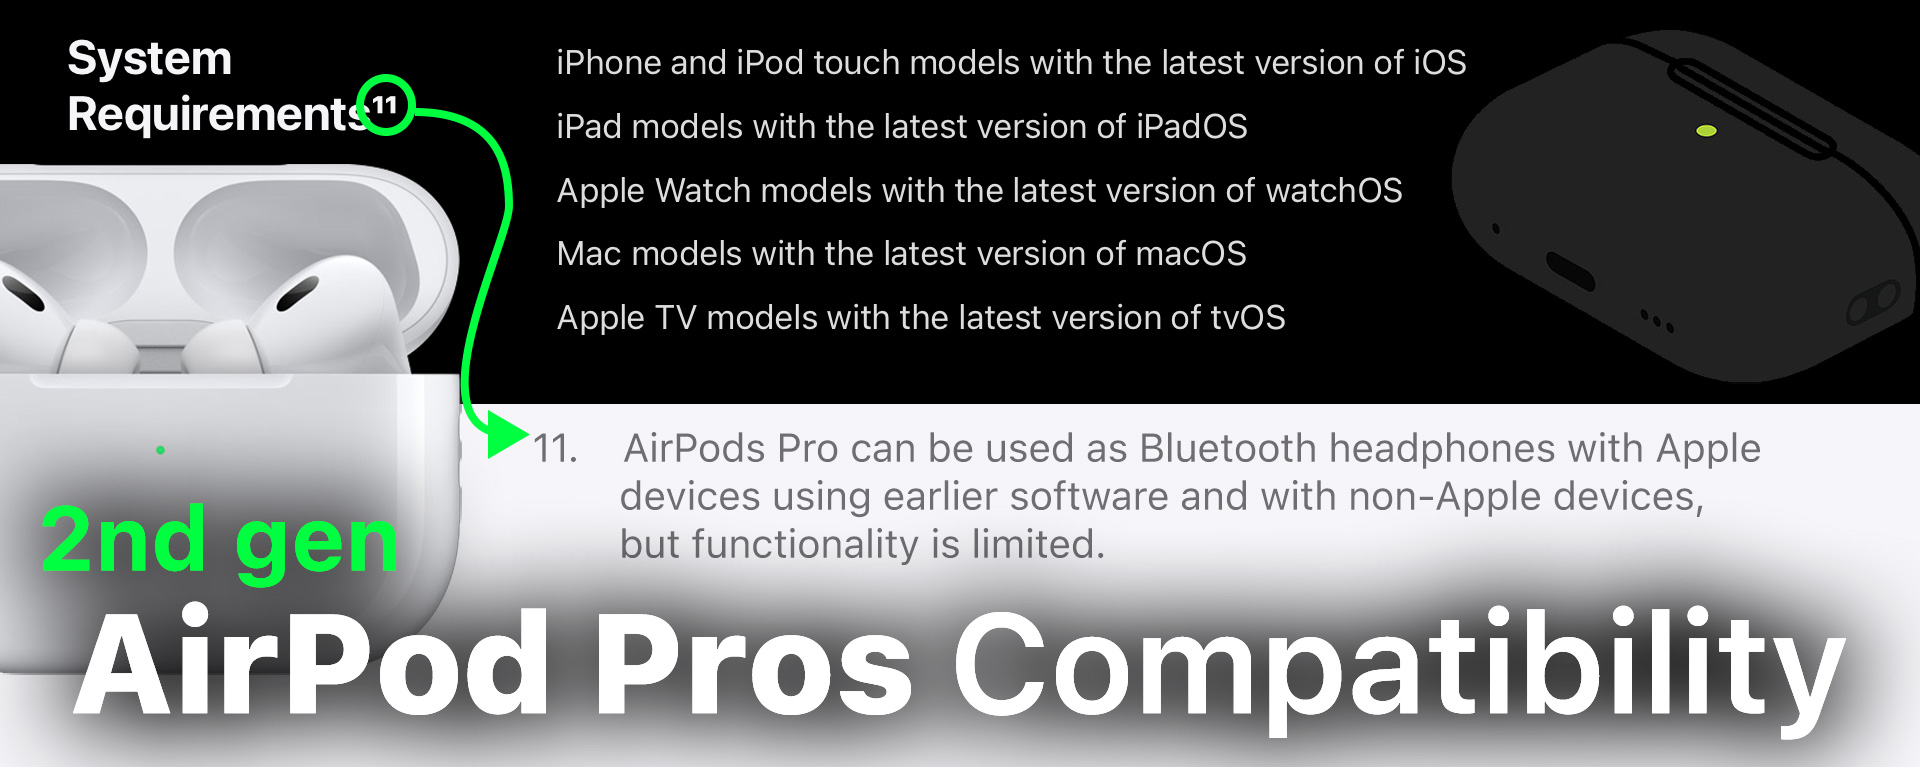 AirPods Pro Compatibility Feature Image